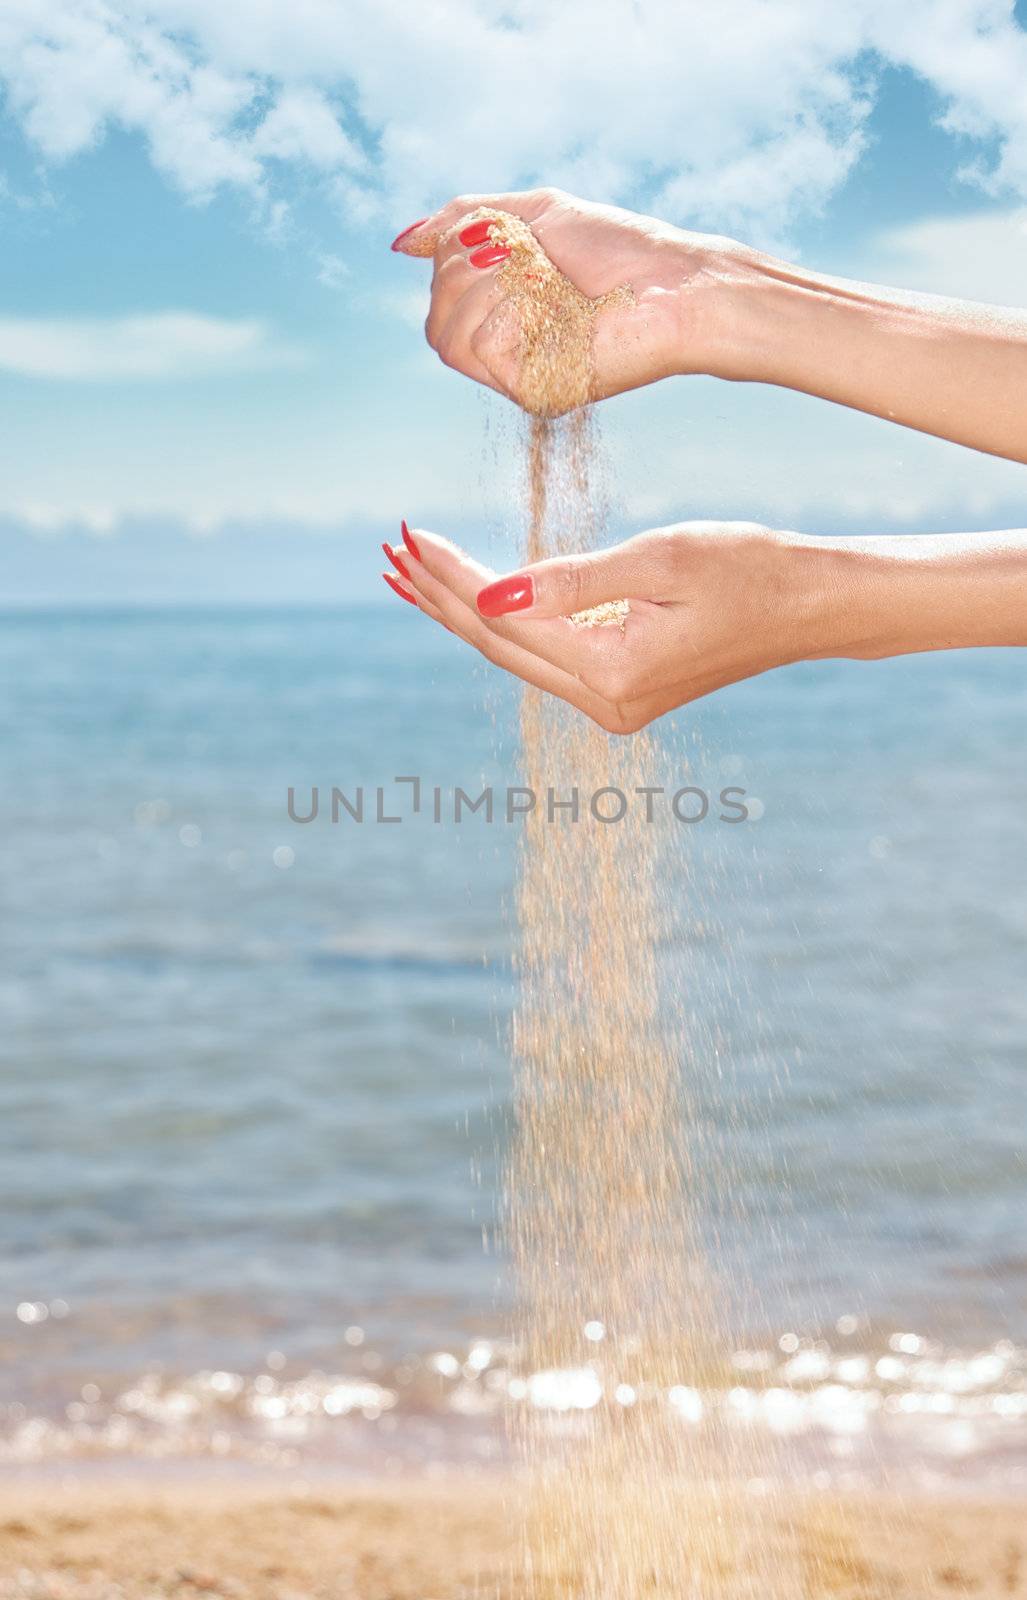 Hands and sand on the beach by Novic